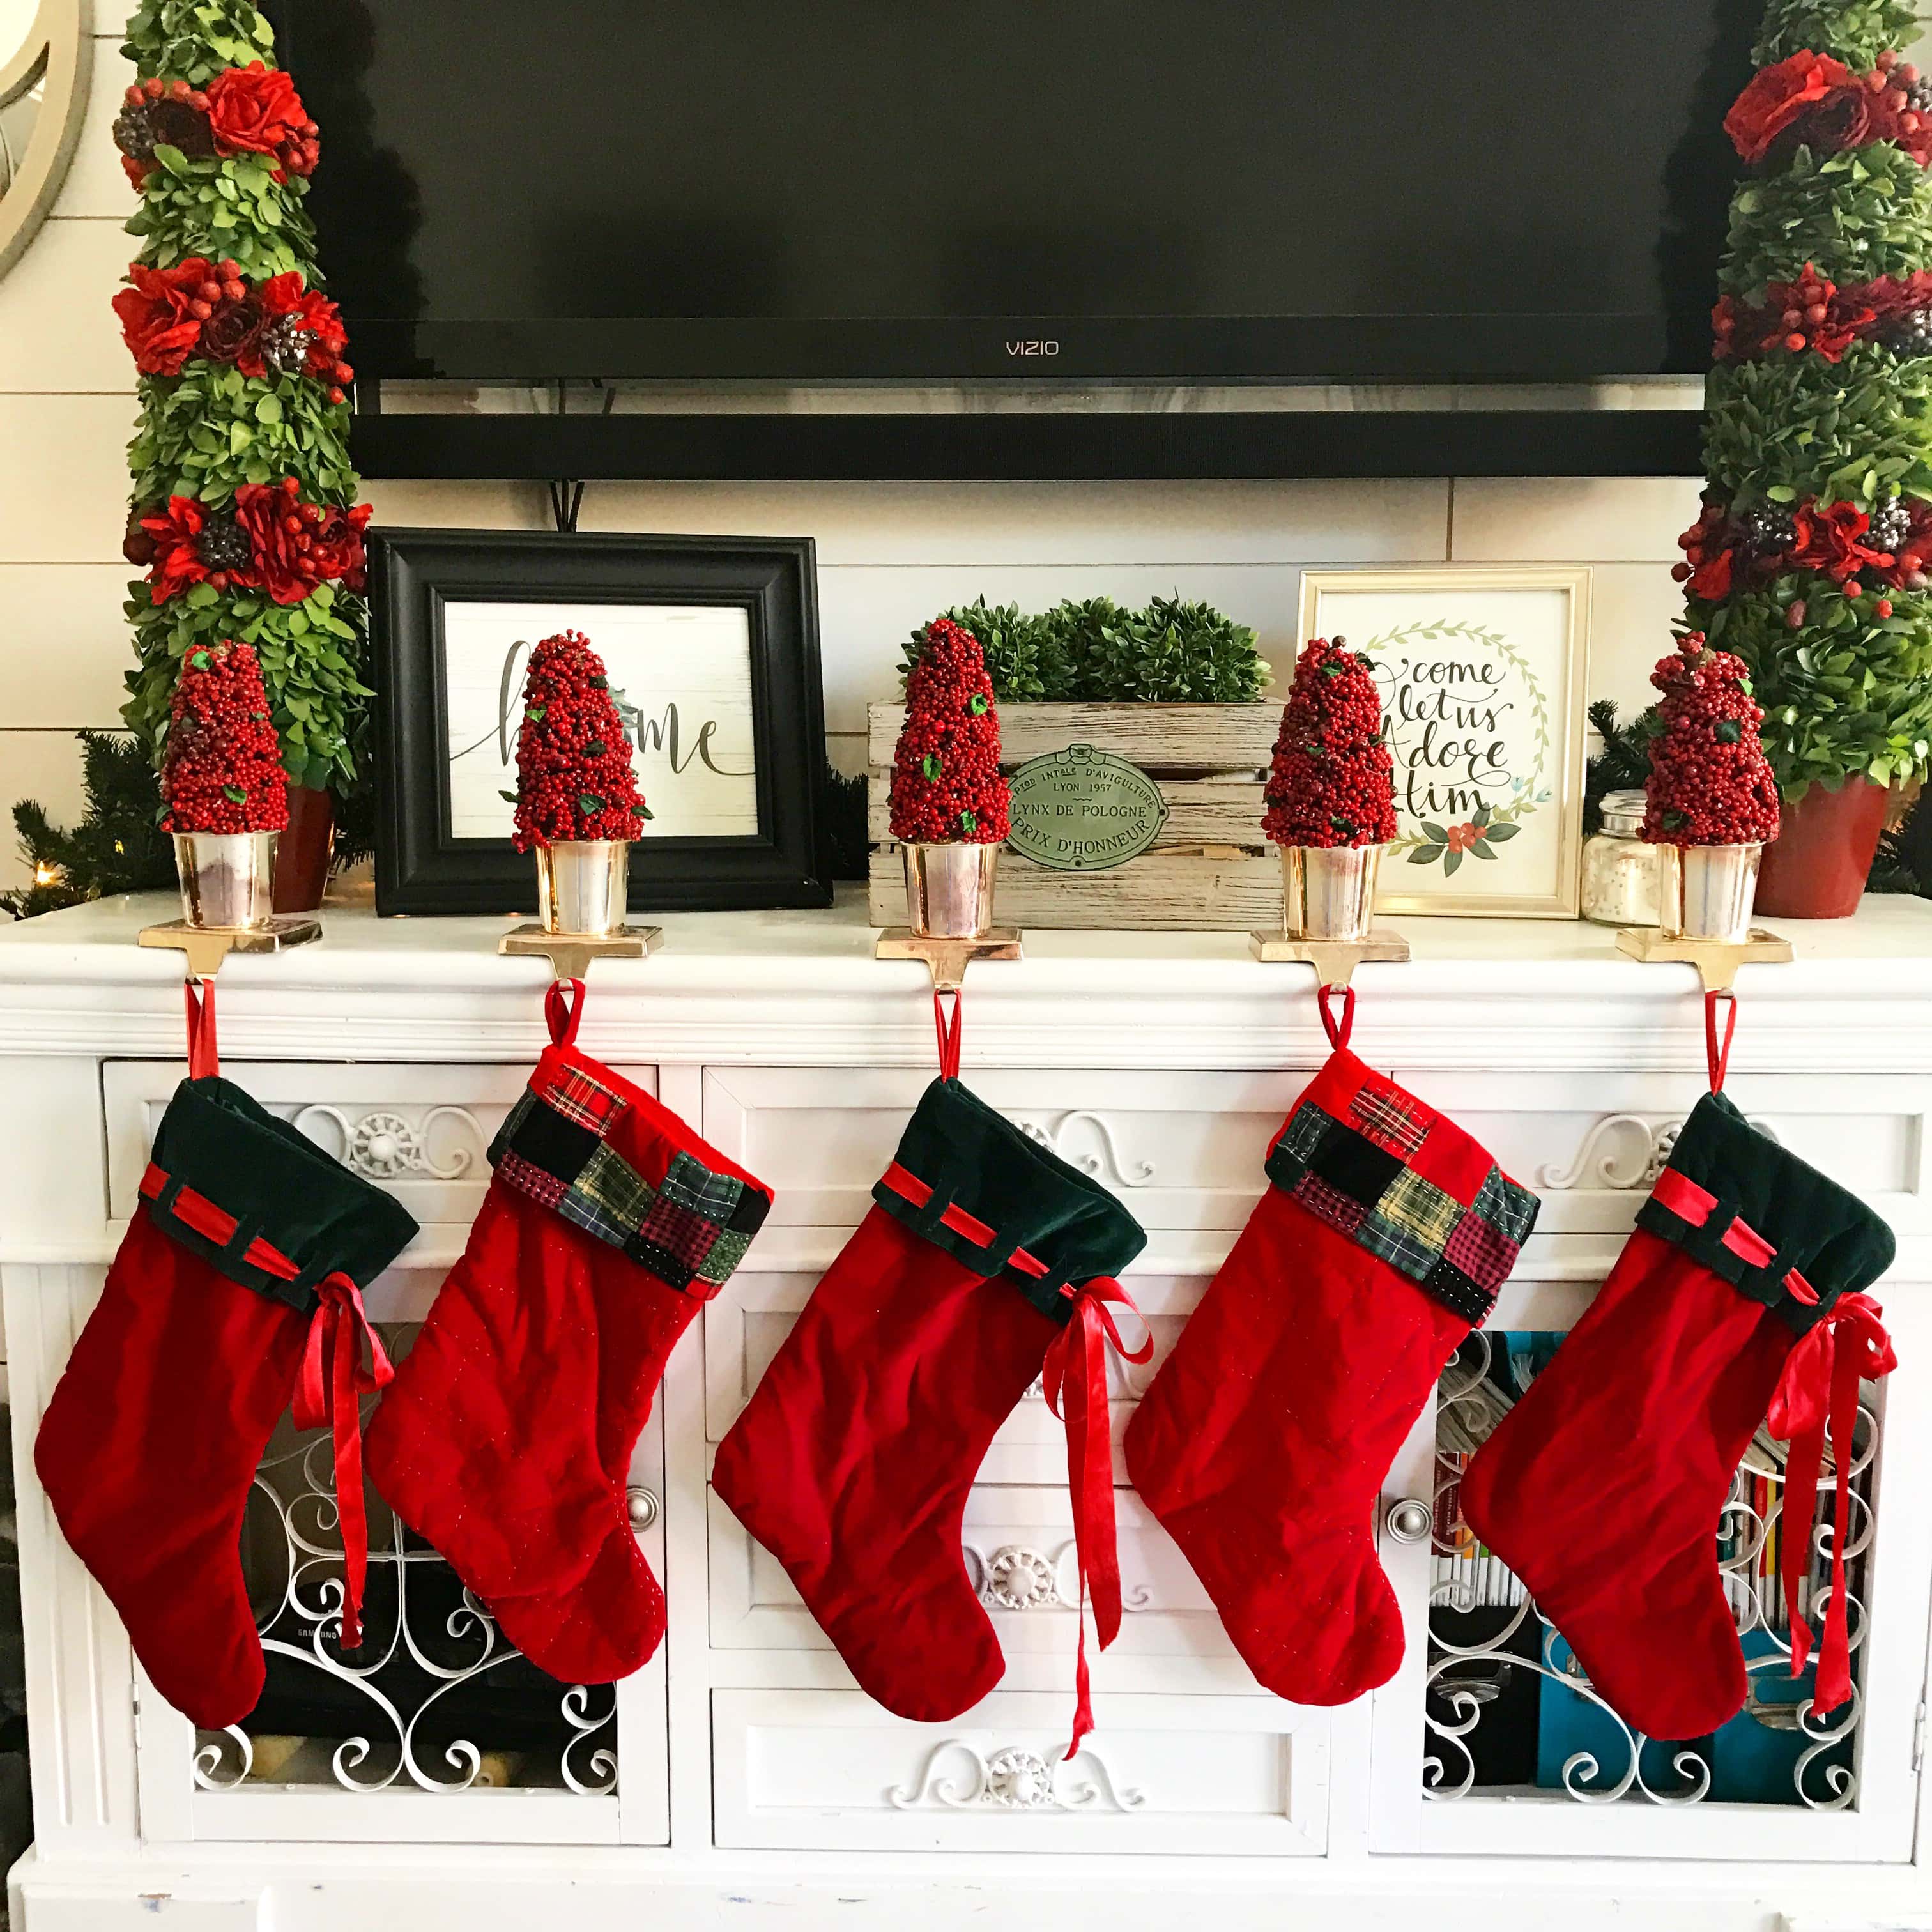 Christmas Decor Ideas by Modern Honey. Stockings display in family room.